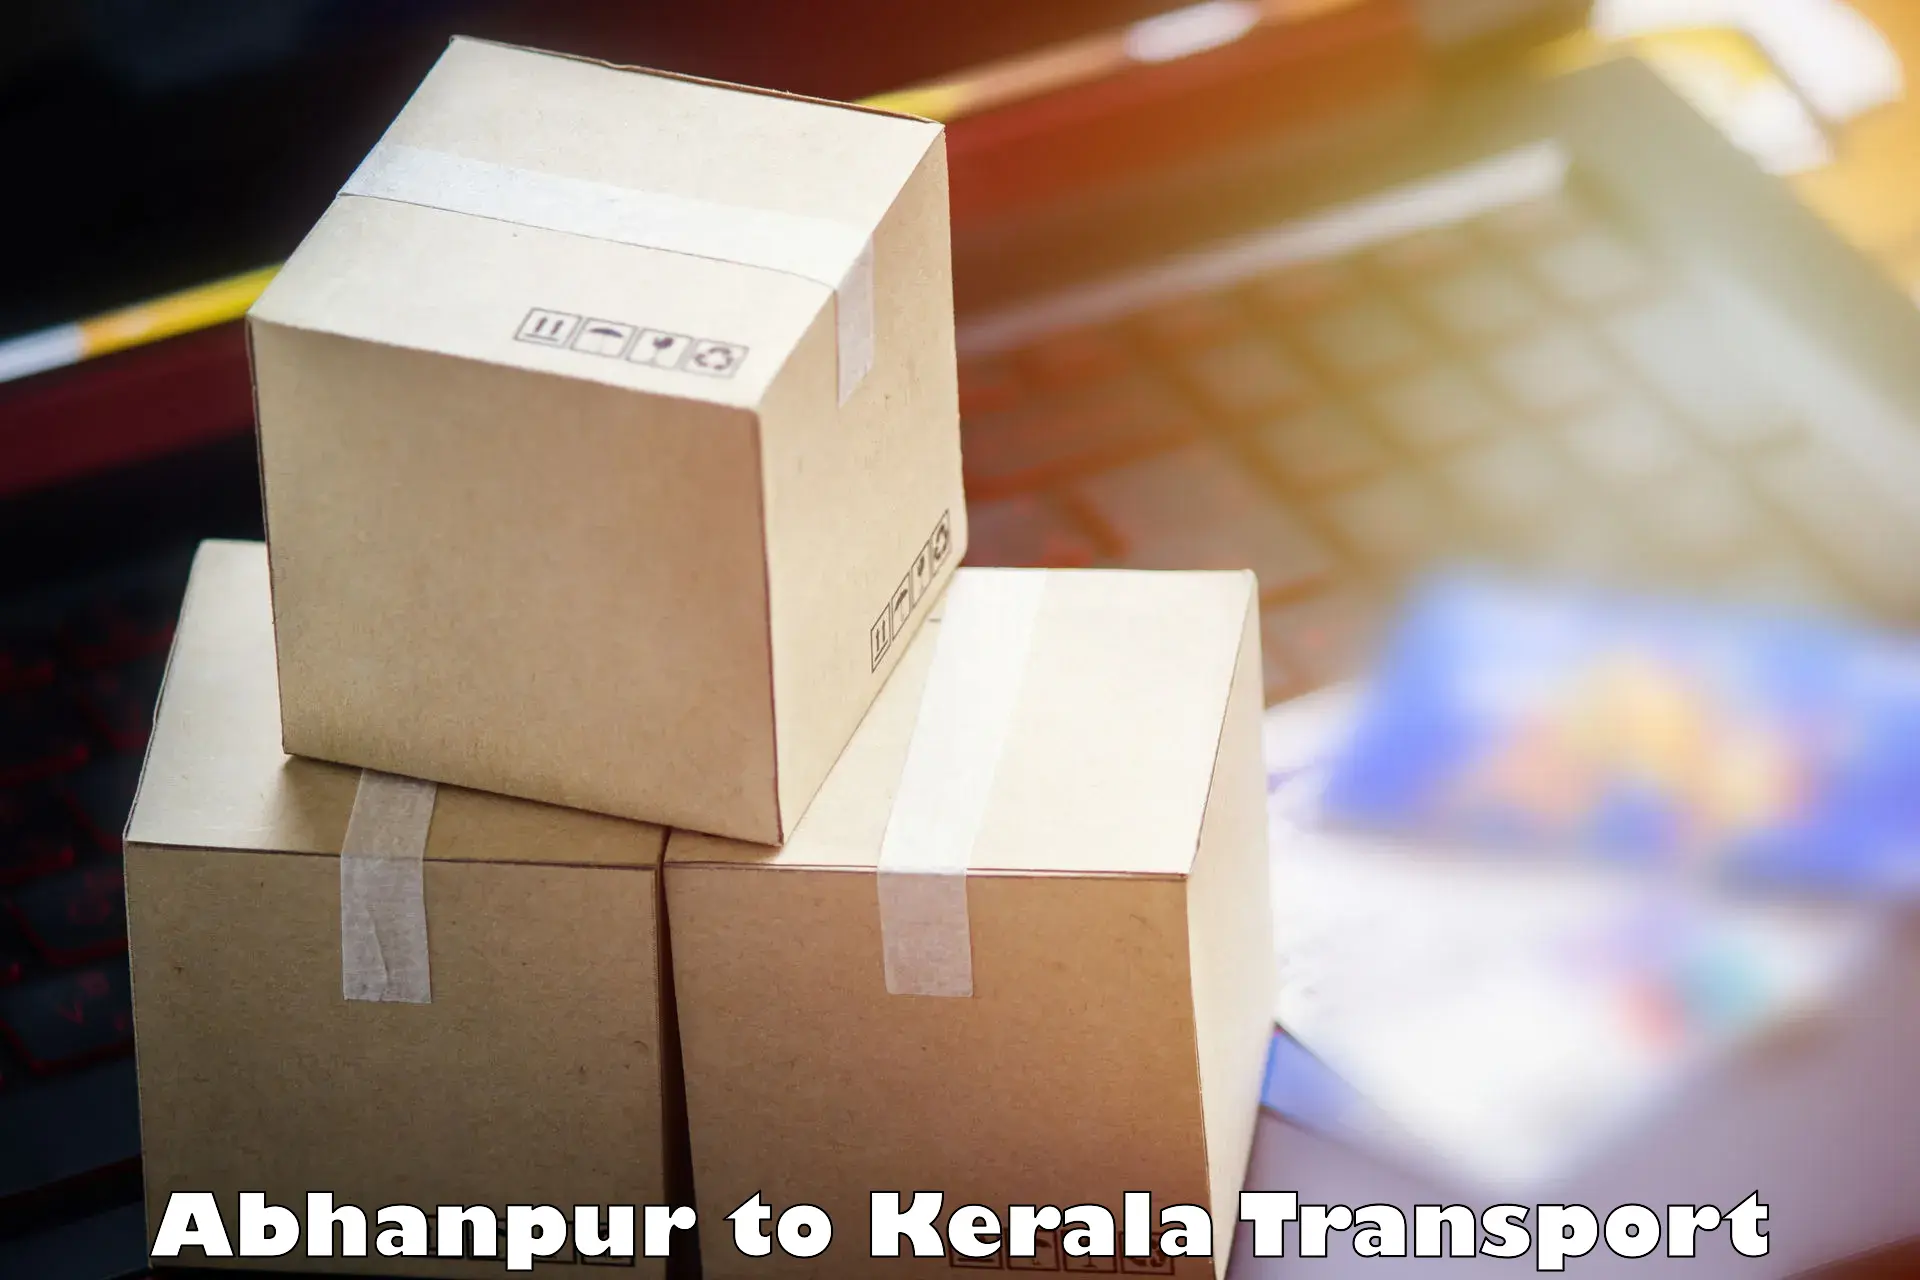 Road transport online services Abhanpur to Shoranur